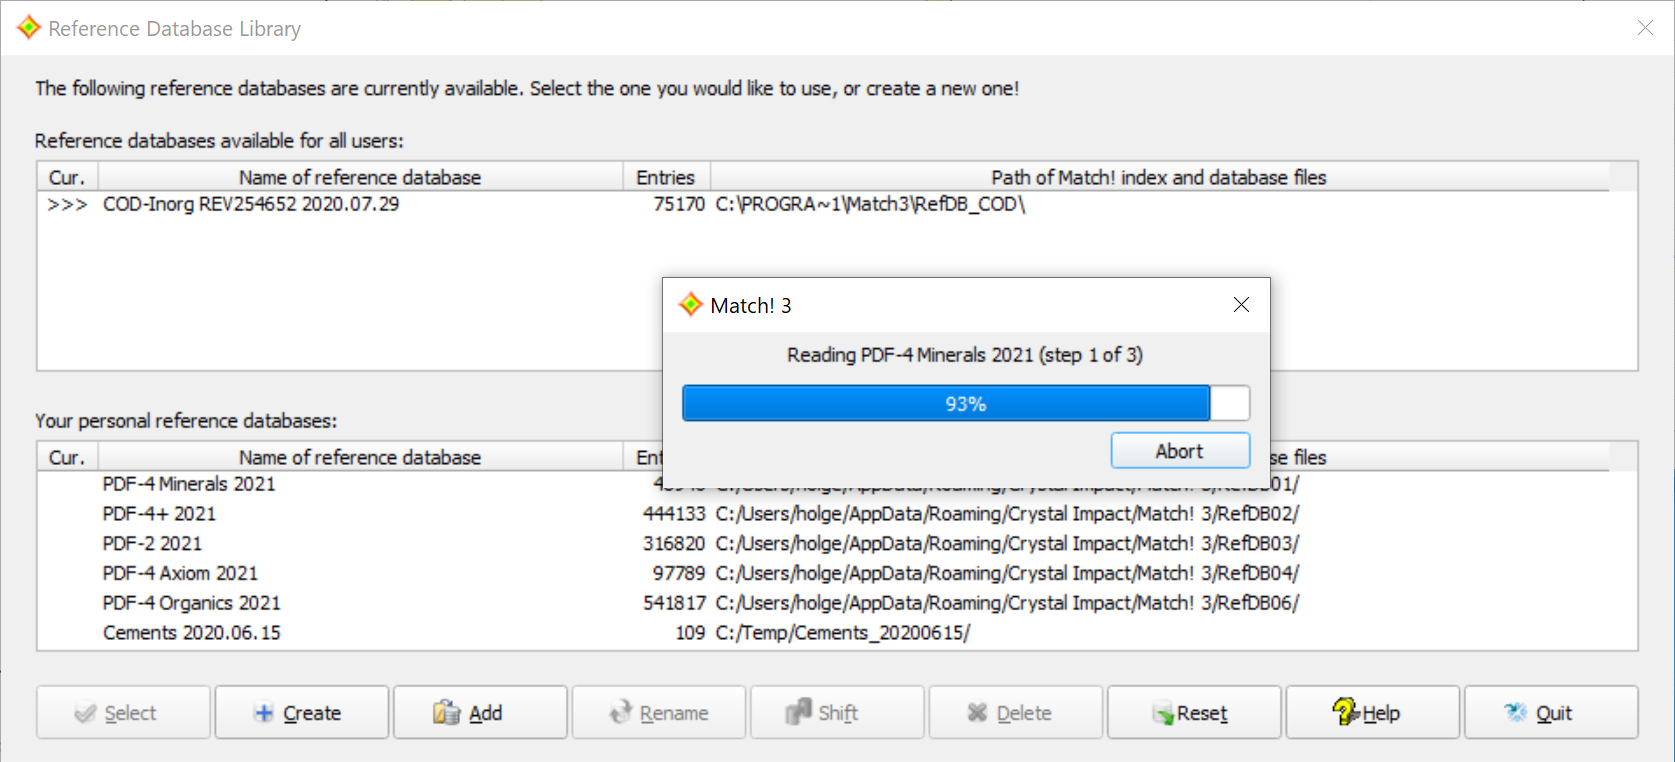 Please wait while Match! is creating index files for the new combined reference database.